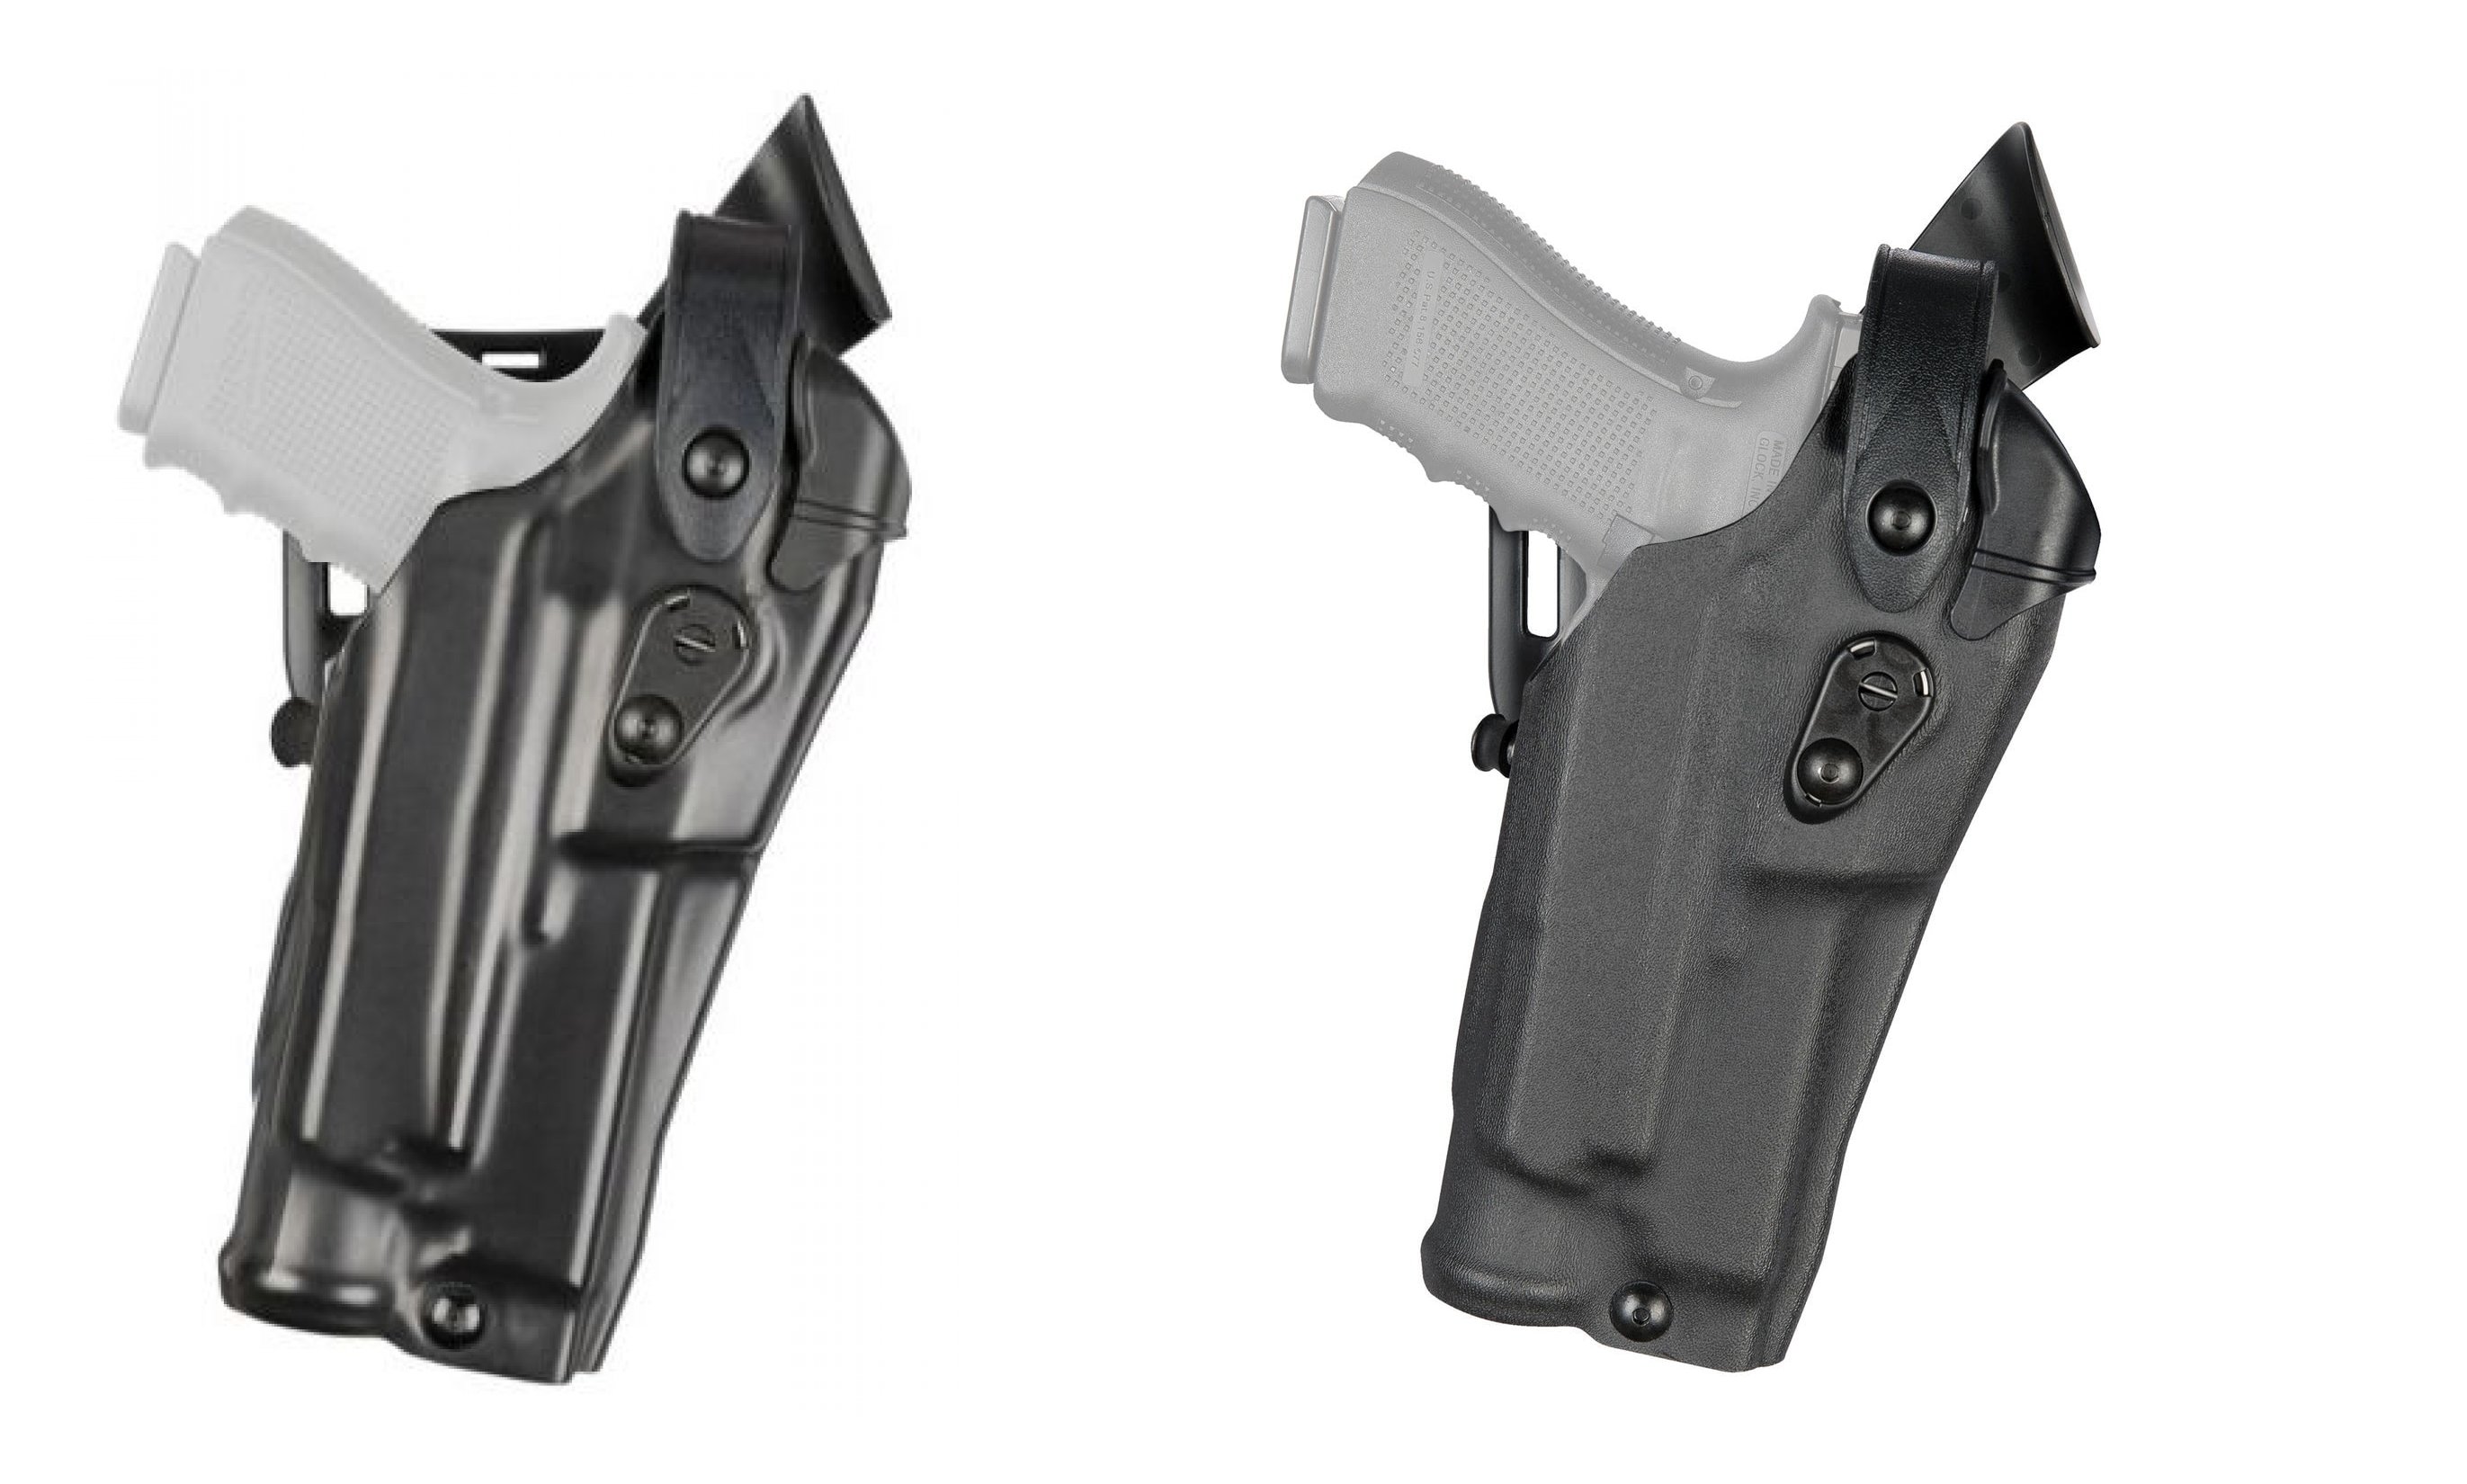  SAFARILAND 6360 Glock Holster, Level III Retention™ Holster  for Glock 17/22 Surefire X300U - Red Dot Optic Compatible, STX Tactical  Black, Right Hand : Sports & Outdoors